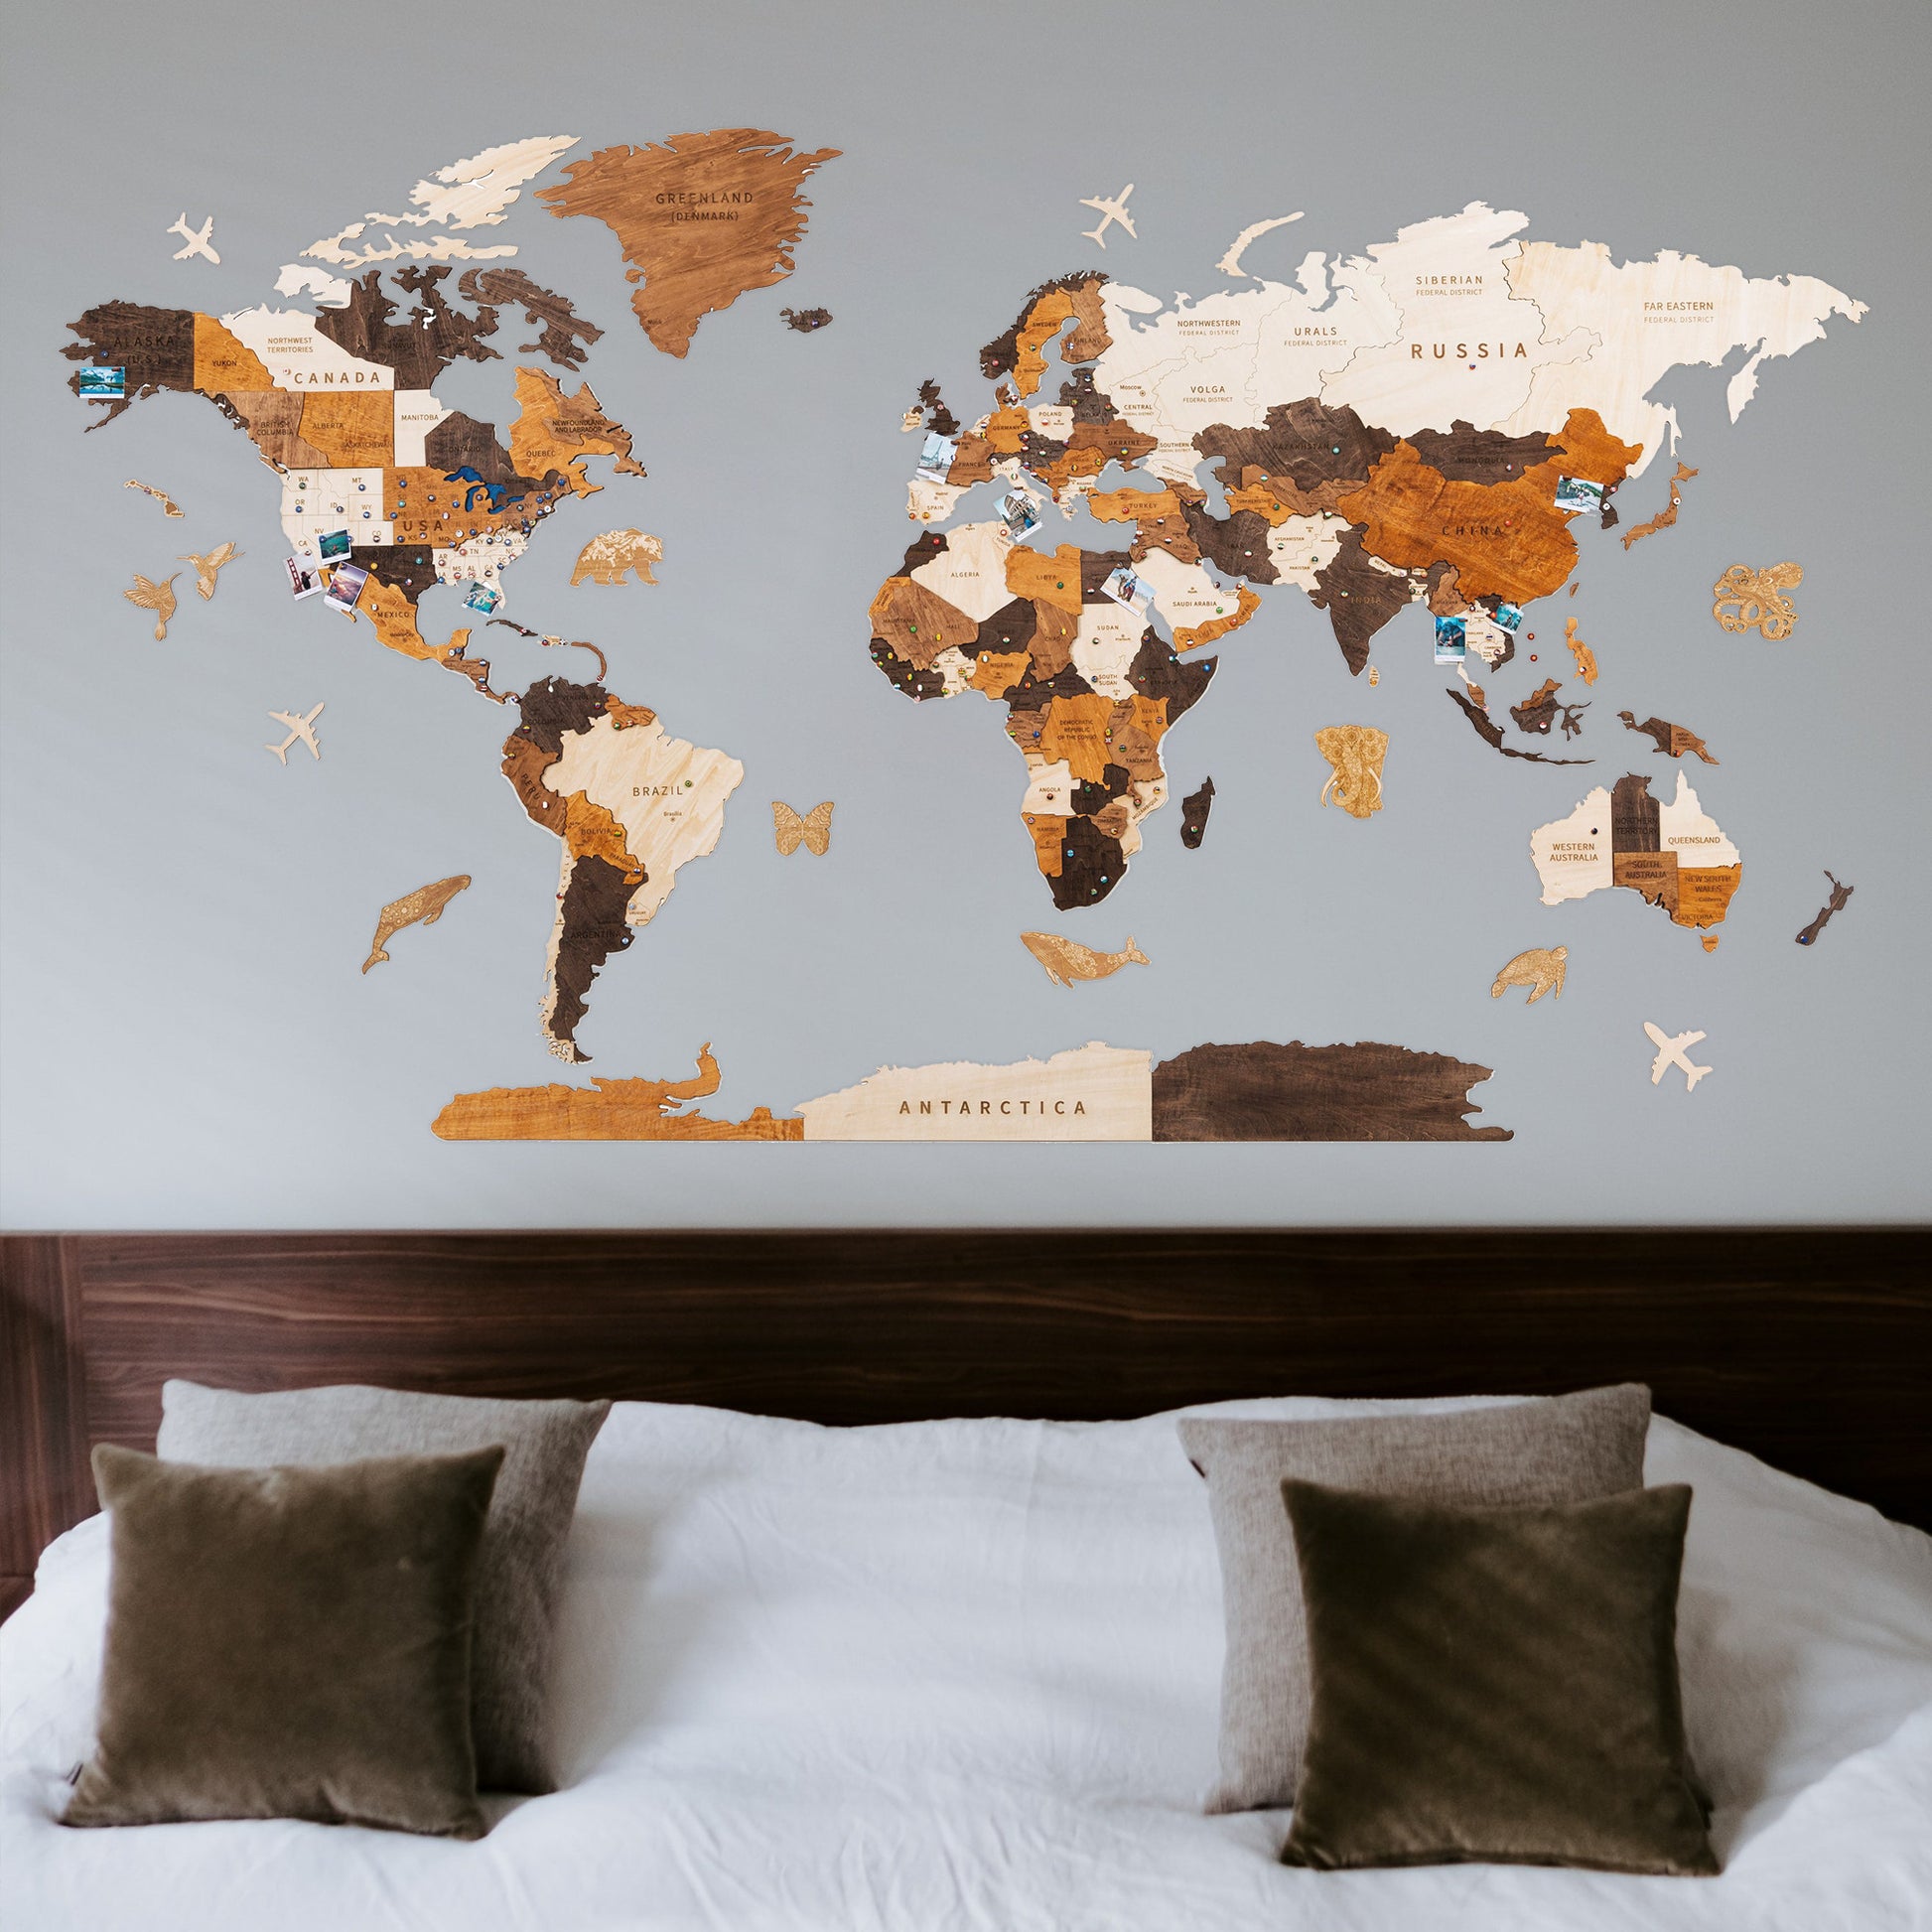 3D Wood World Map - Gifts ideas for world travlers